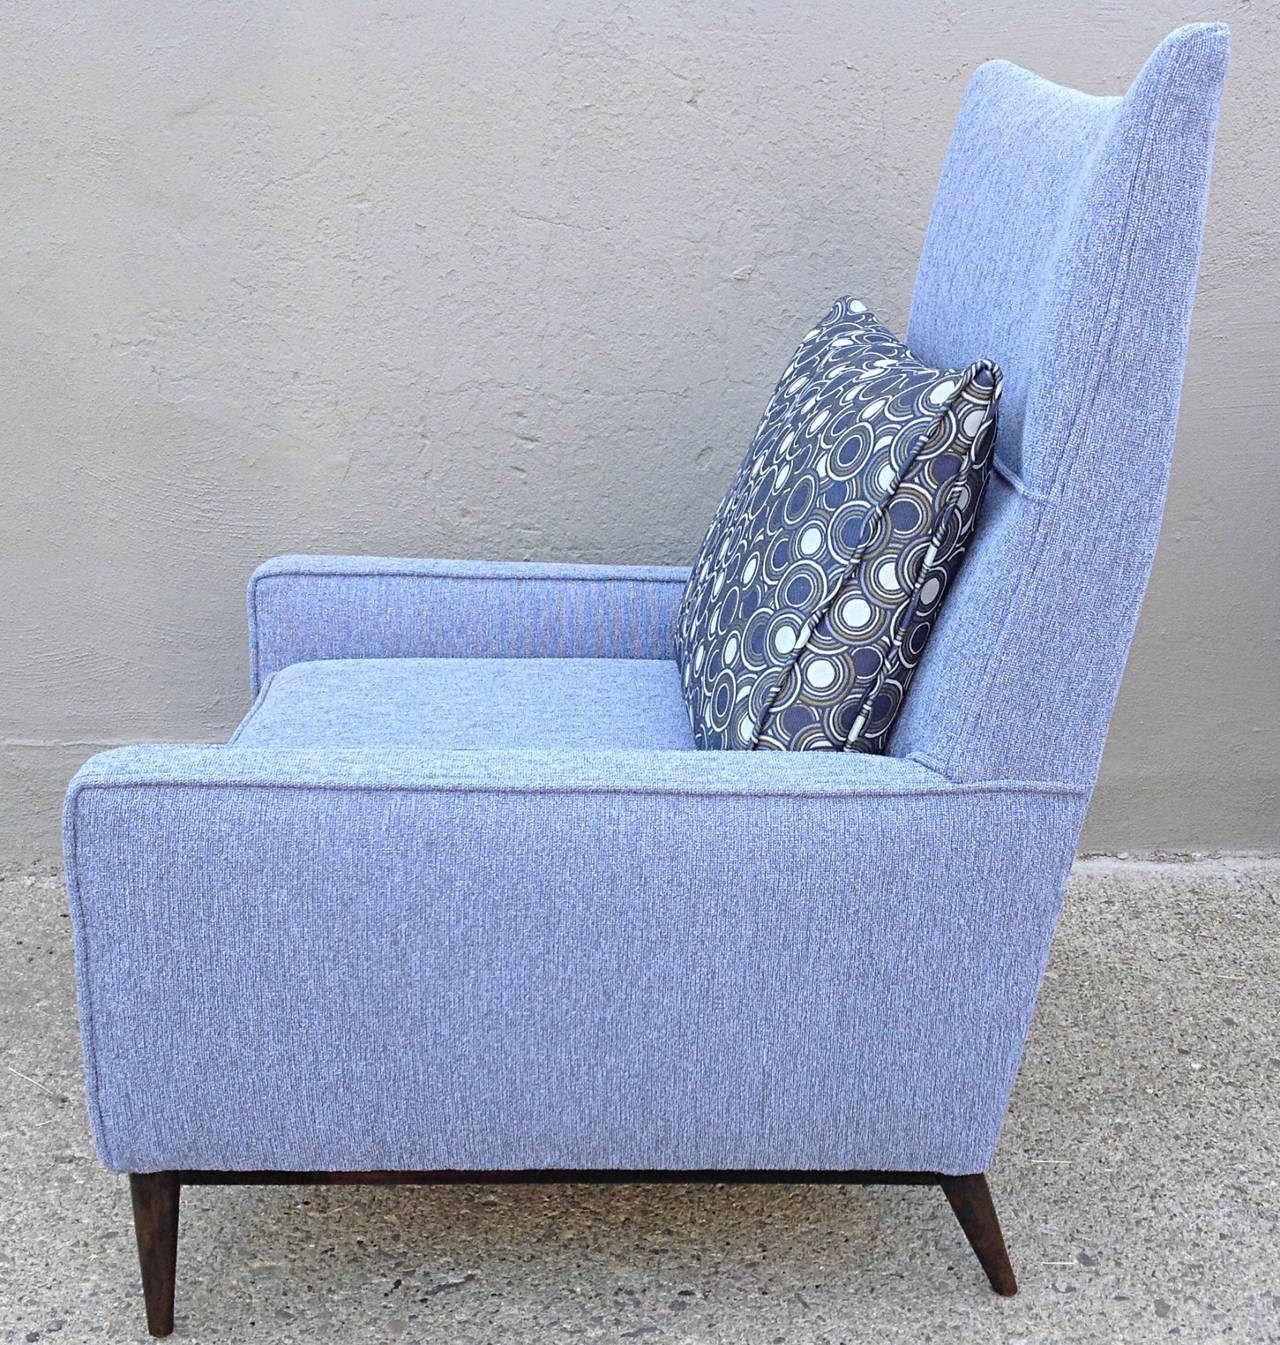 Classic McCobb stylish design. A graceful combination of sleek lines with subtle curves. Newly reupholstered in a woven nubby cotton with periwinkle blue and grey hues and contrast wedge pillow. Wood work in  espresso.